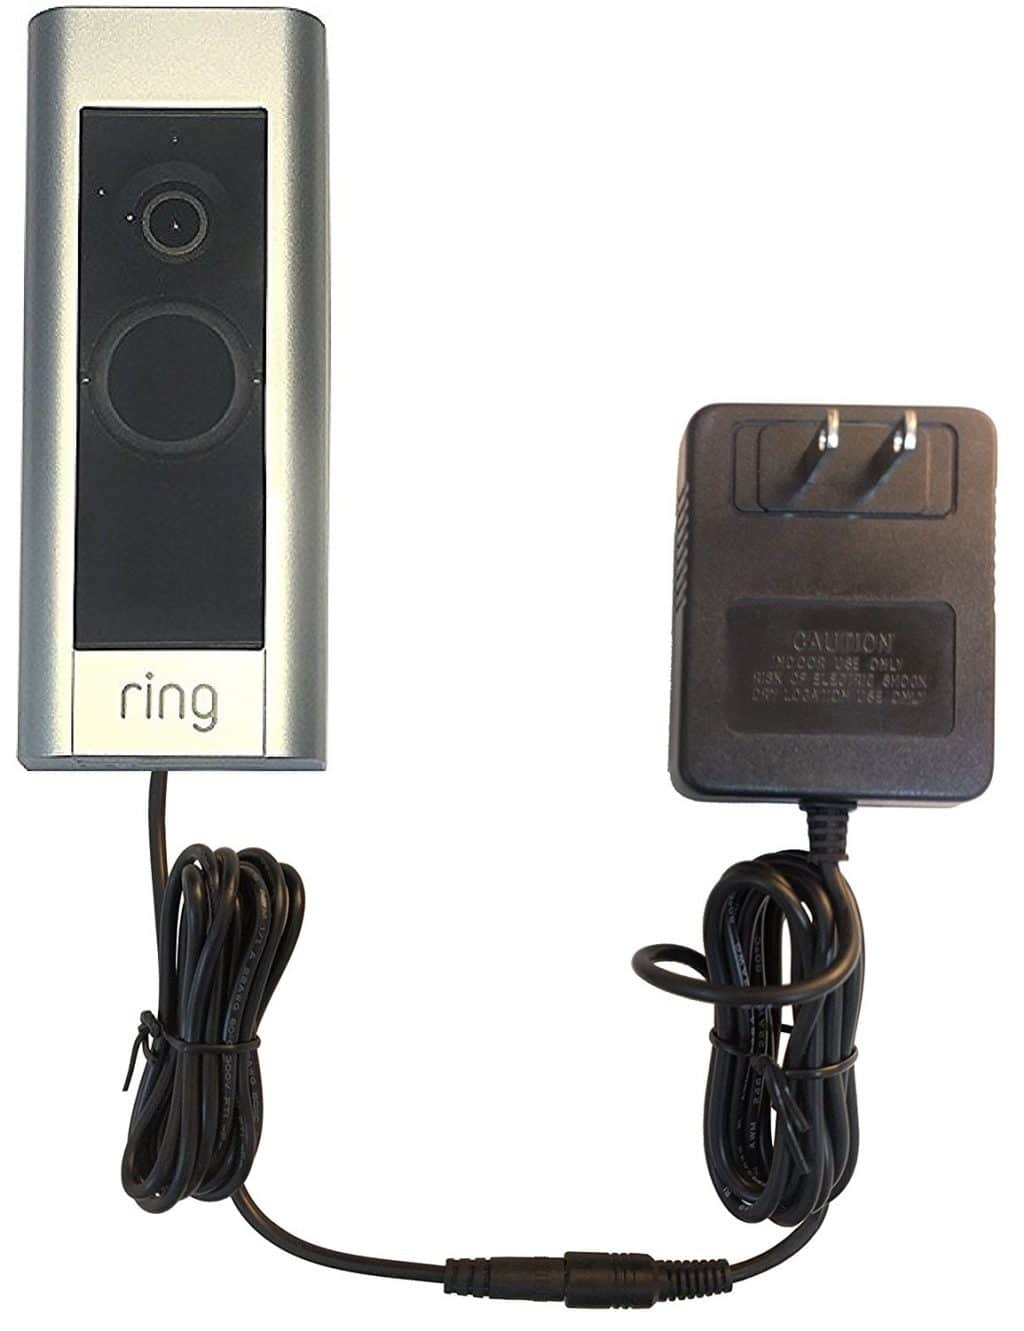 The most gifted ring doorbell pro power kit for sale.